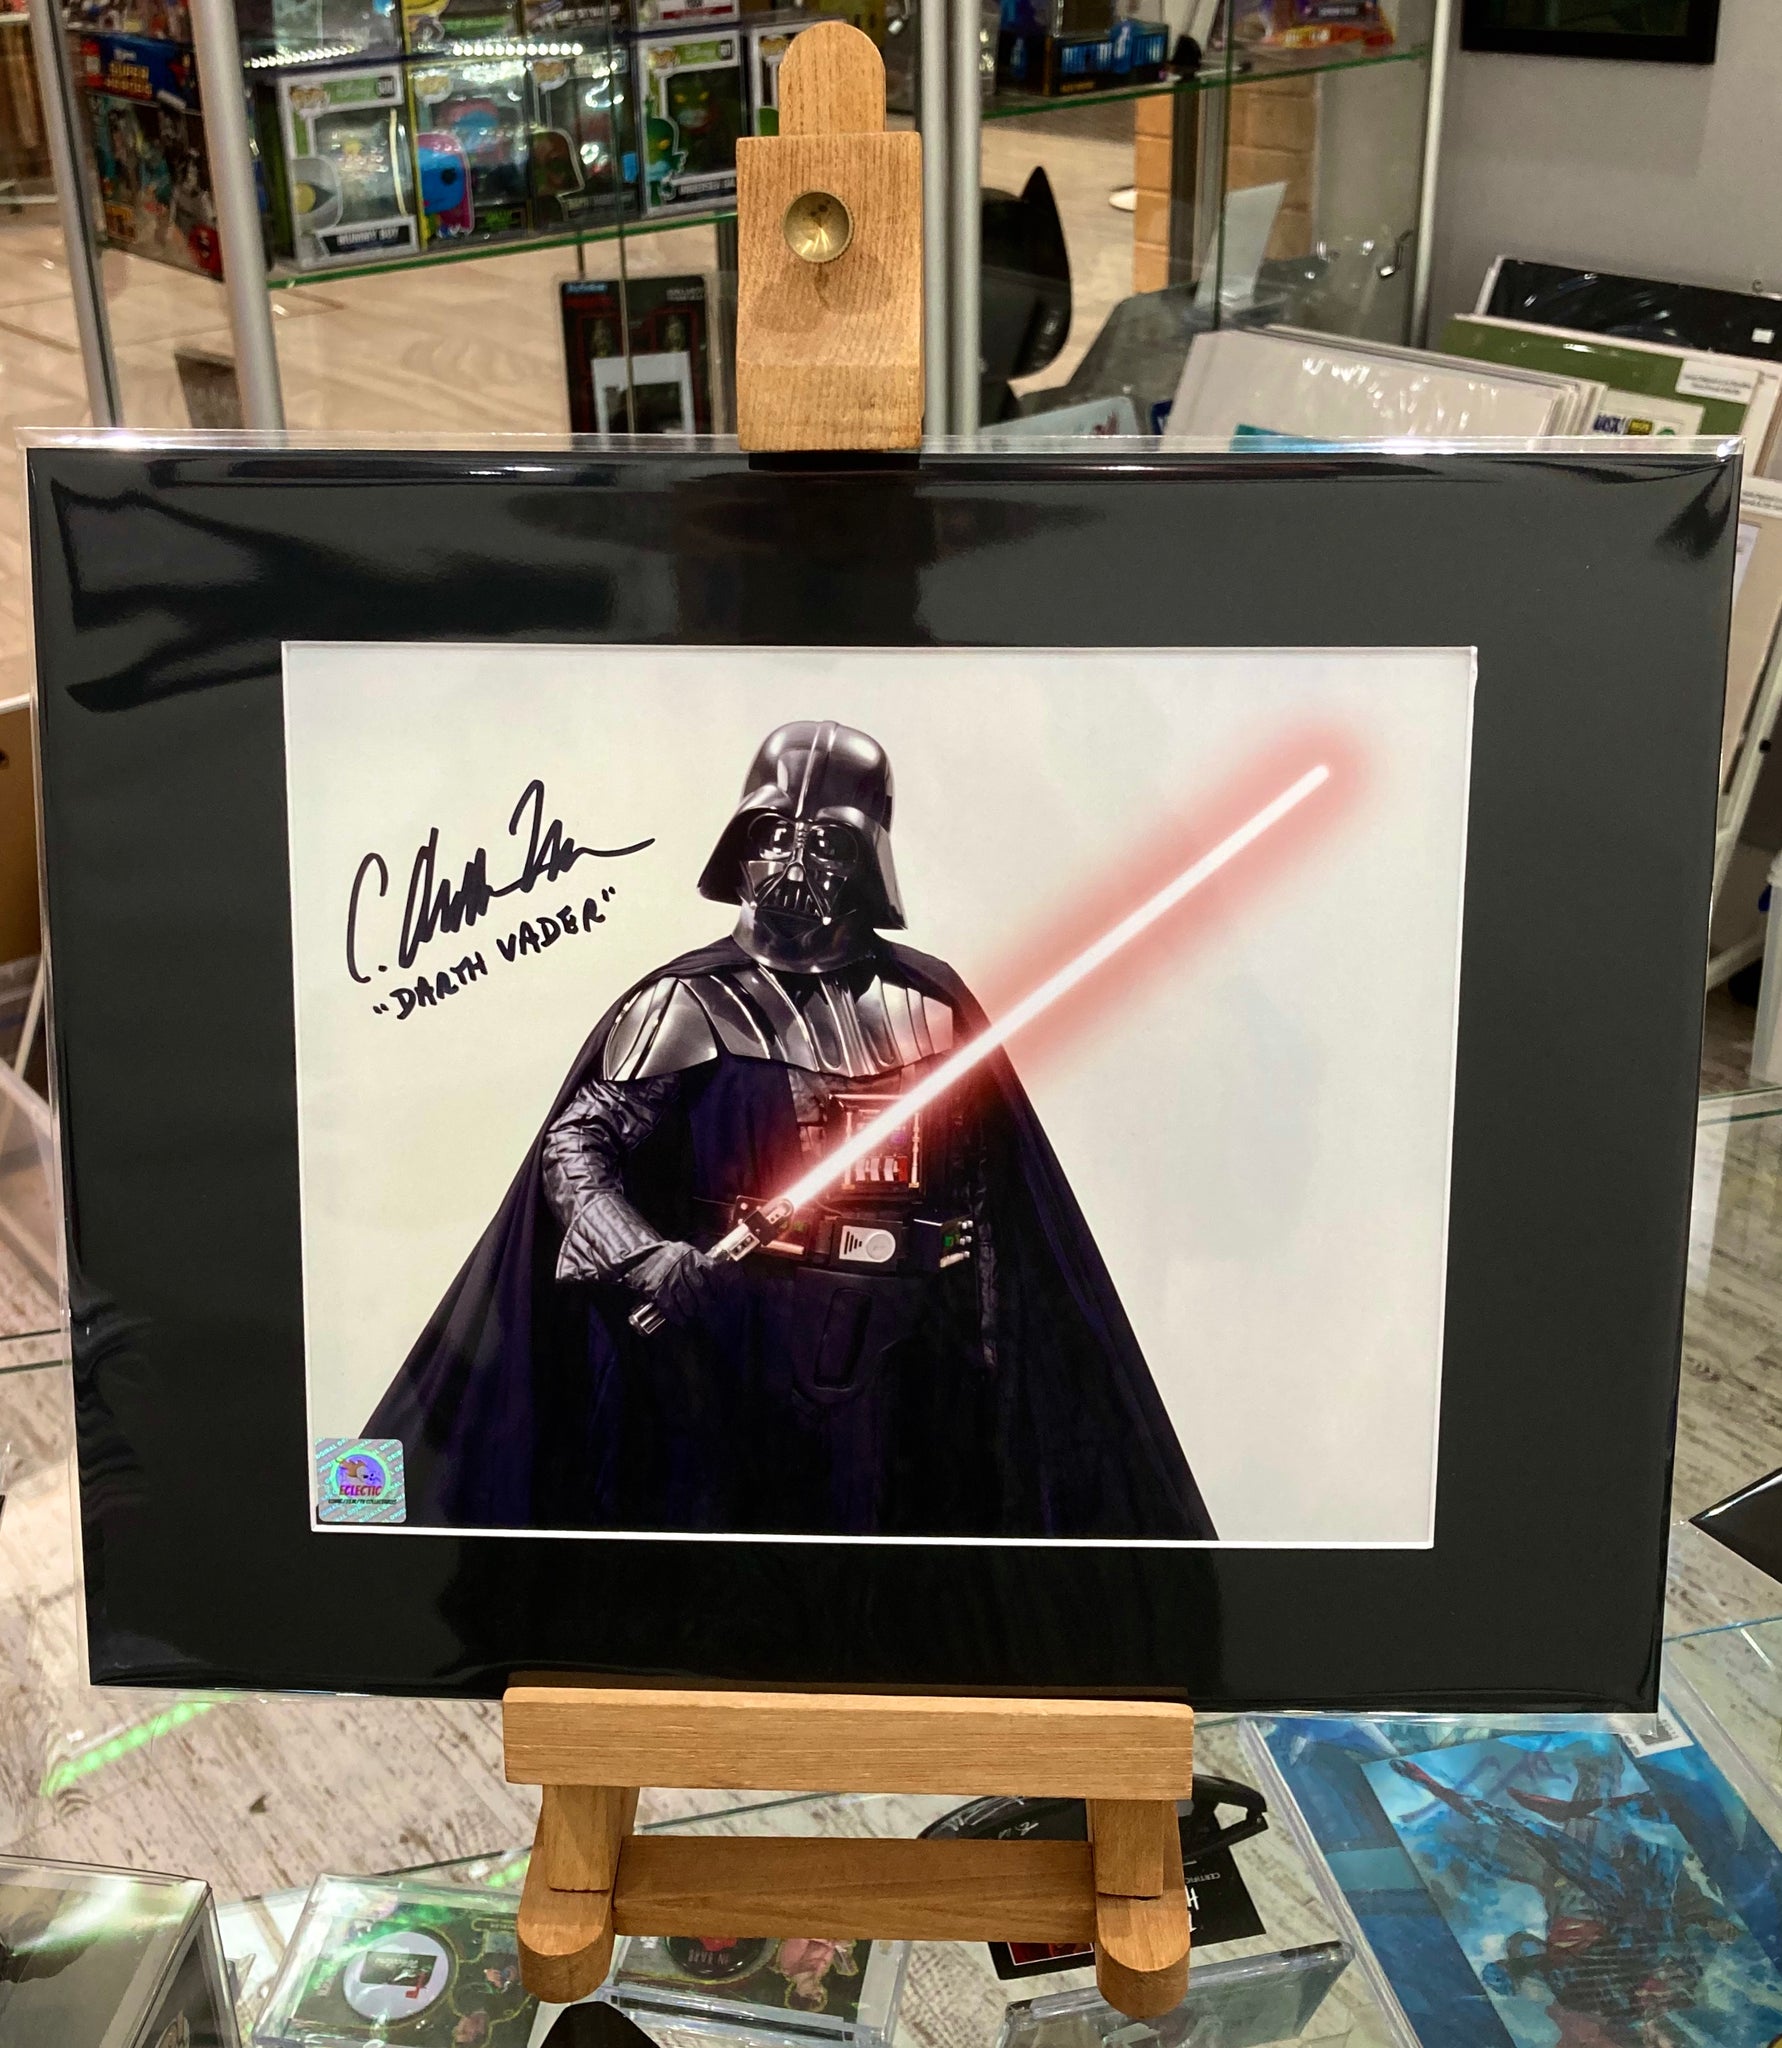 Star Wars Darth Vader C. Andrew Nelson Autographed Mounted Photograph with Double Layer Authenticity